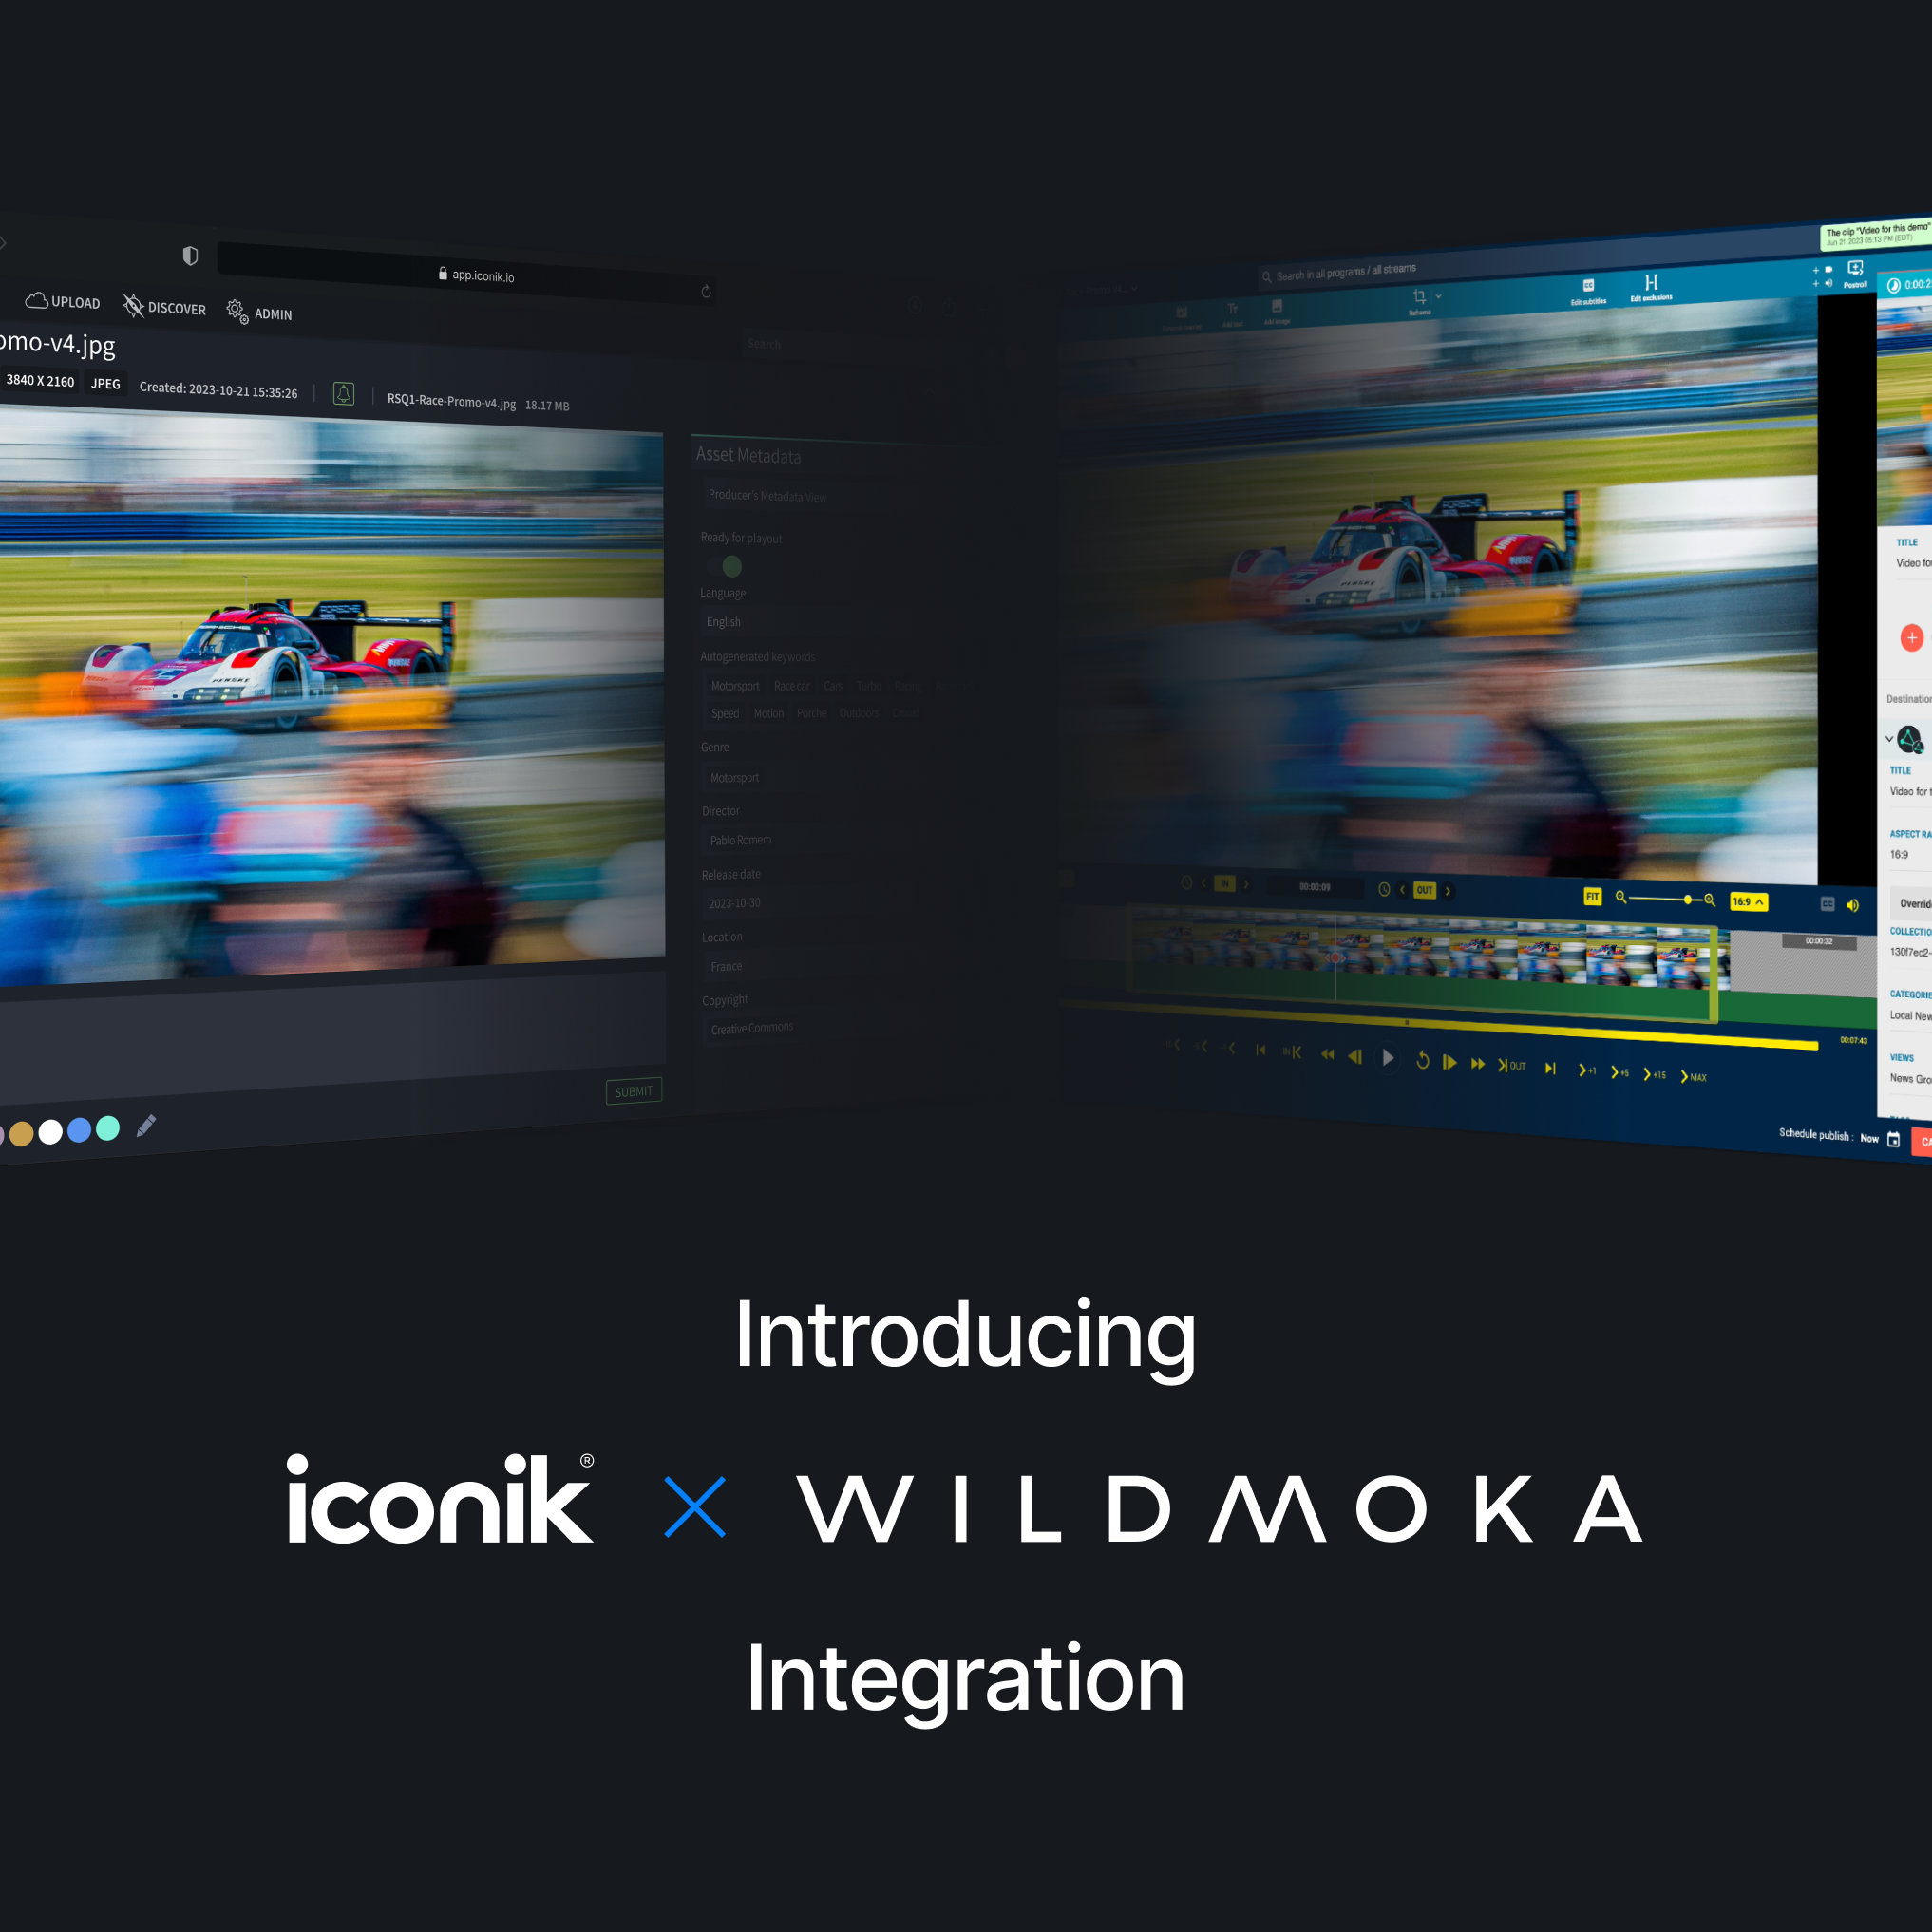 A new way to unite content creation and management: iconik x Wildmoka